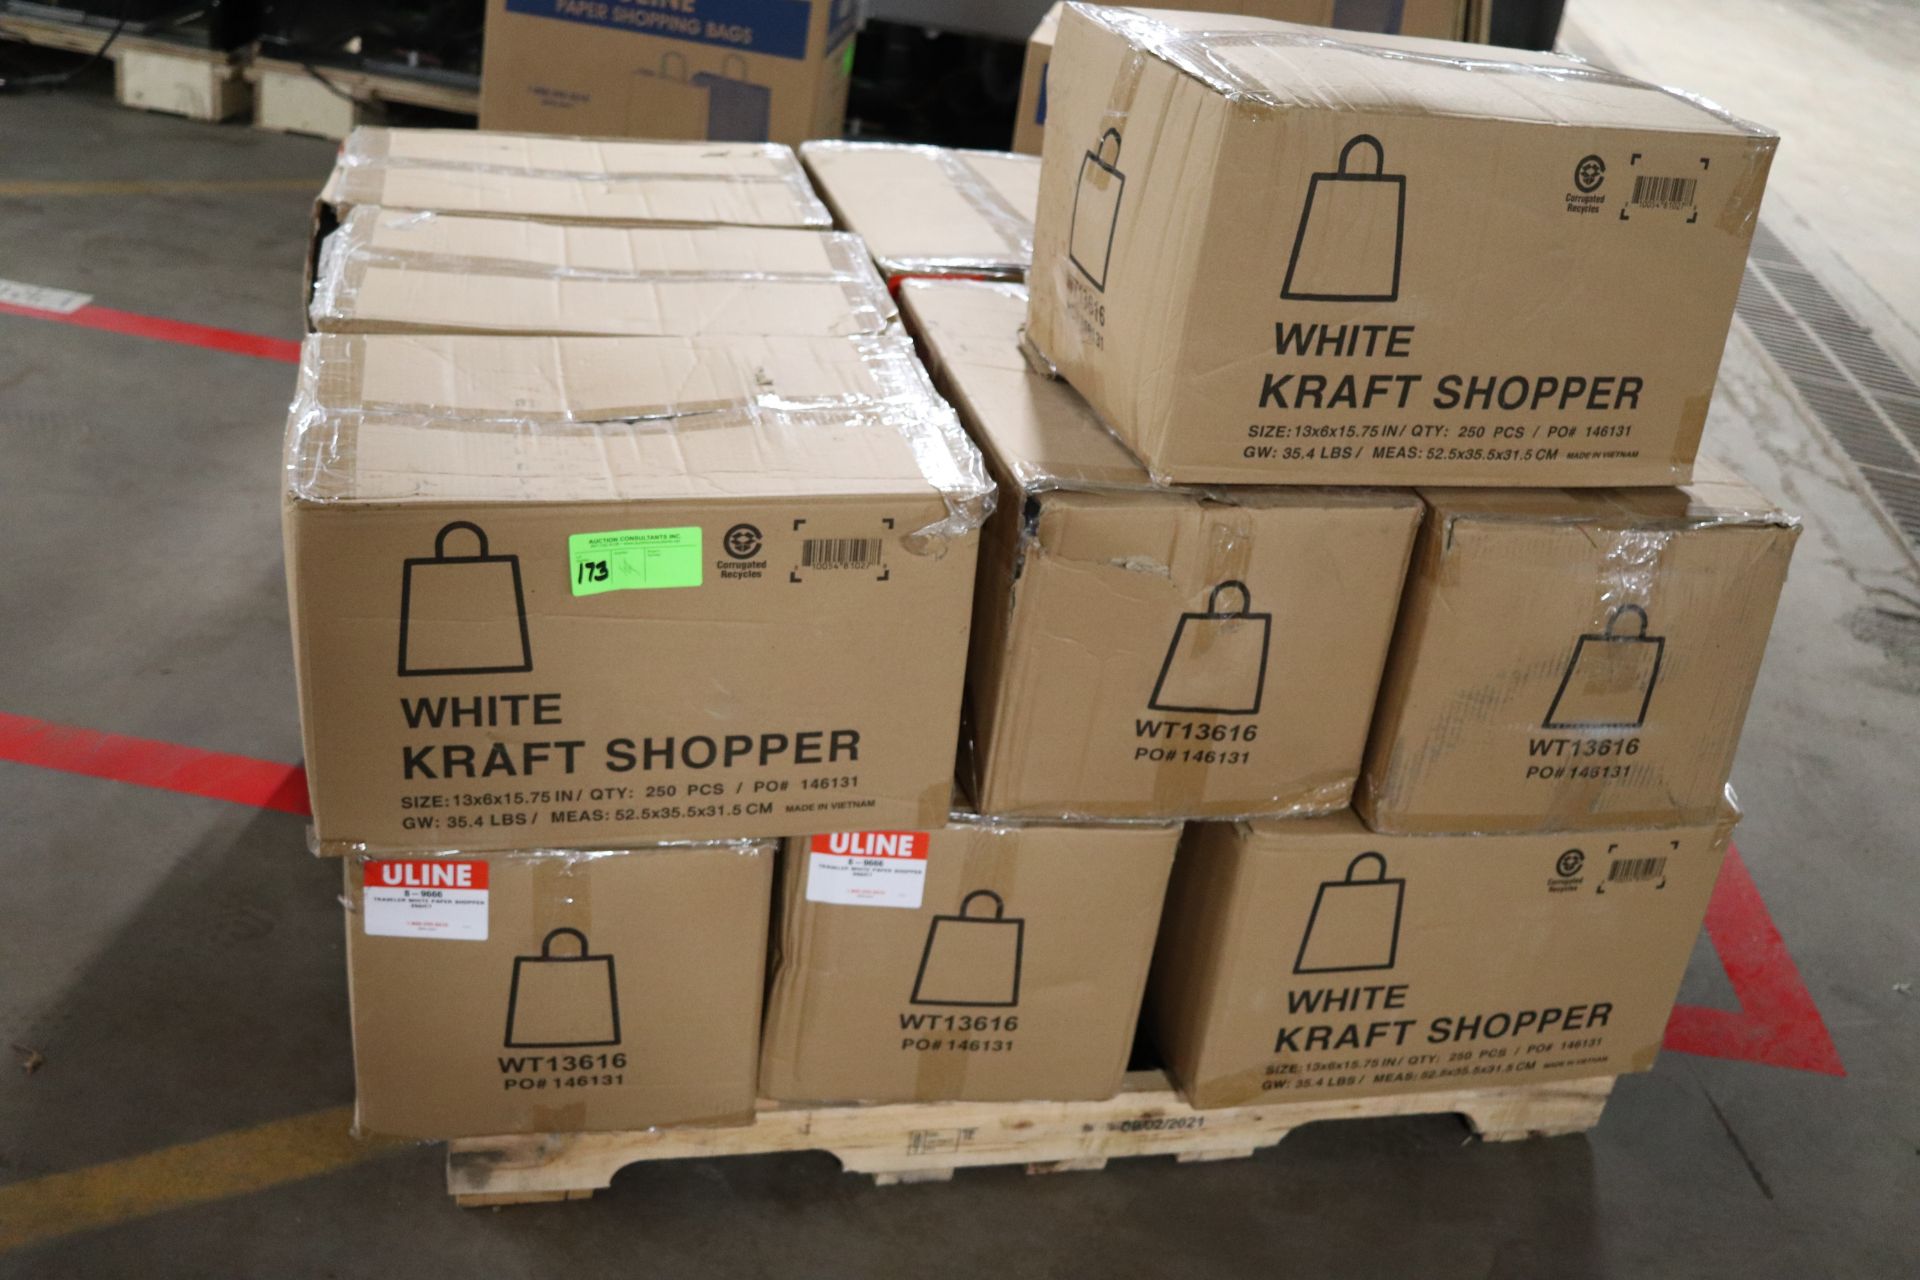 Fourteen cases of white craft shoppers, Uline model S9666, 250 per case